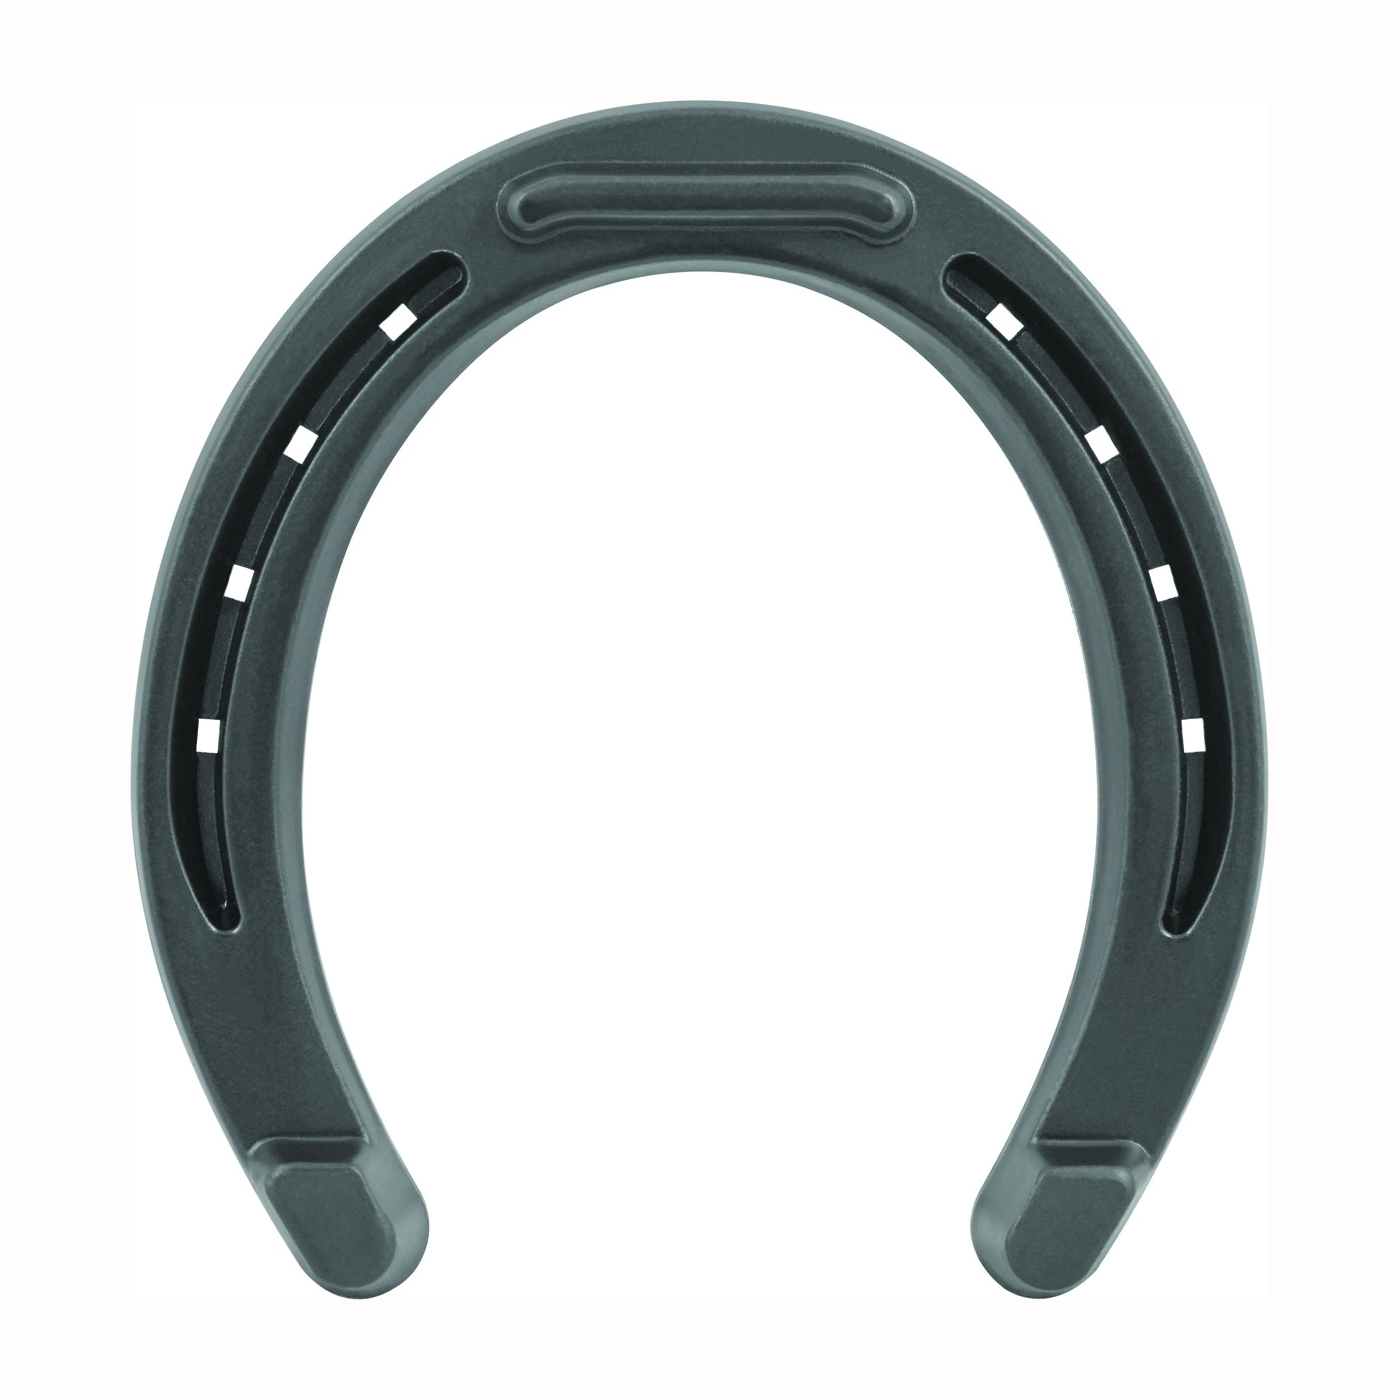 00THB Horseshoe, 5/16 in Thick, #00, Steel